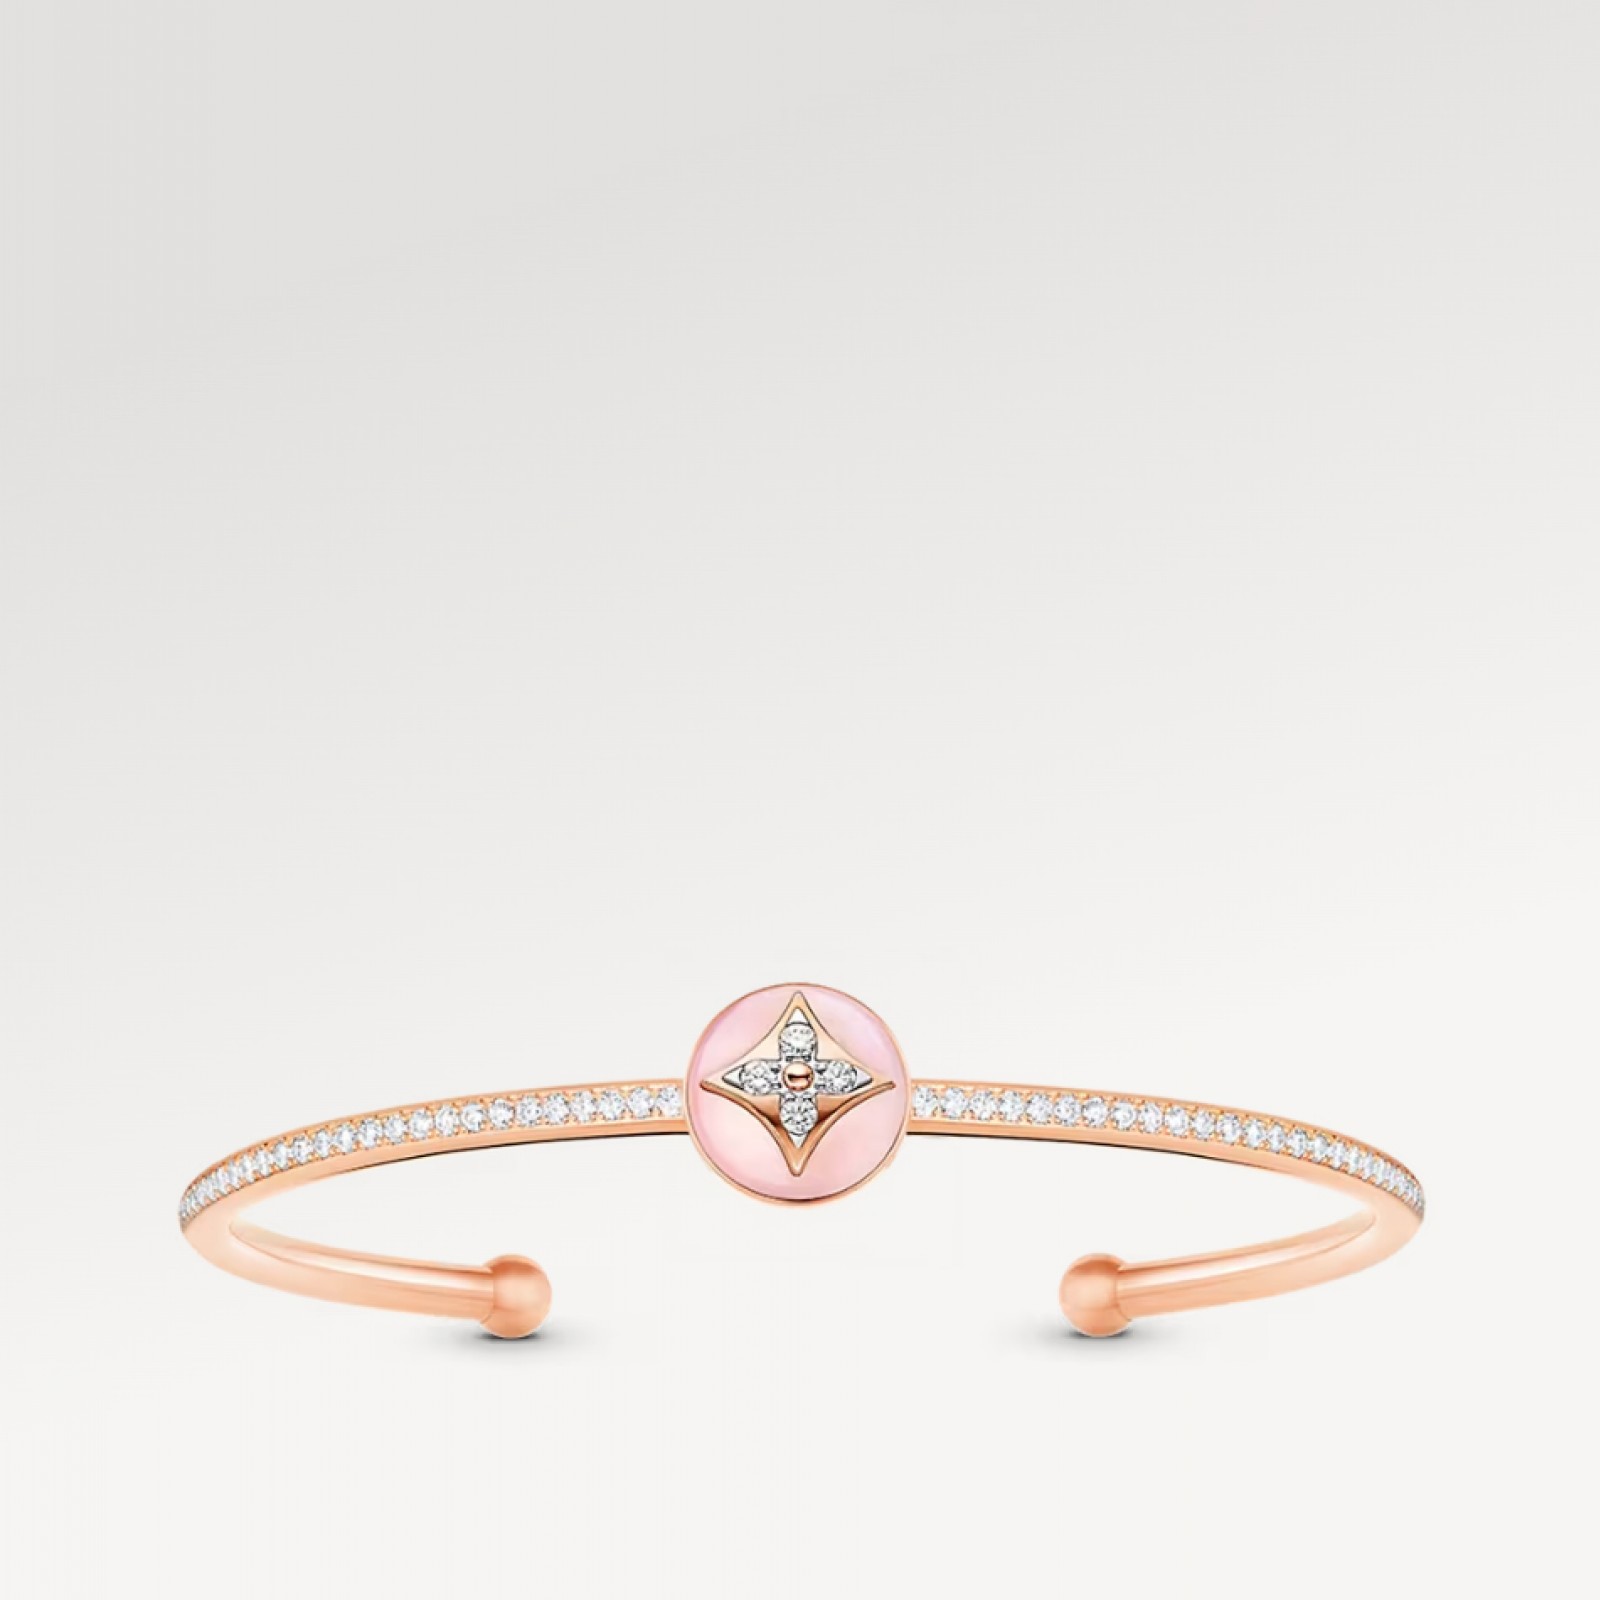 Color Blossom Open Bangle, Pink Gold, White Gold, Pink Opal And Diamonds